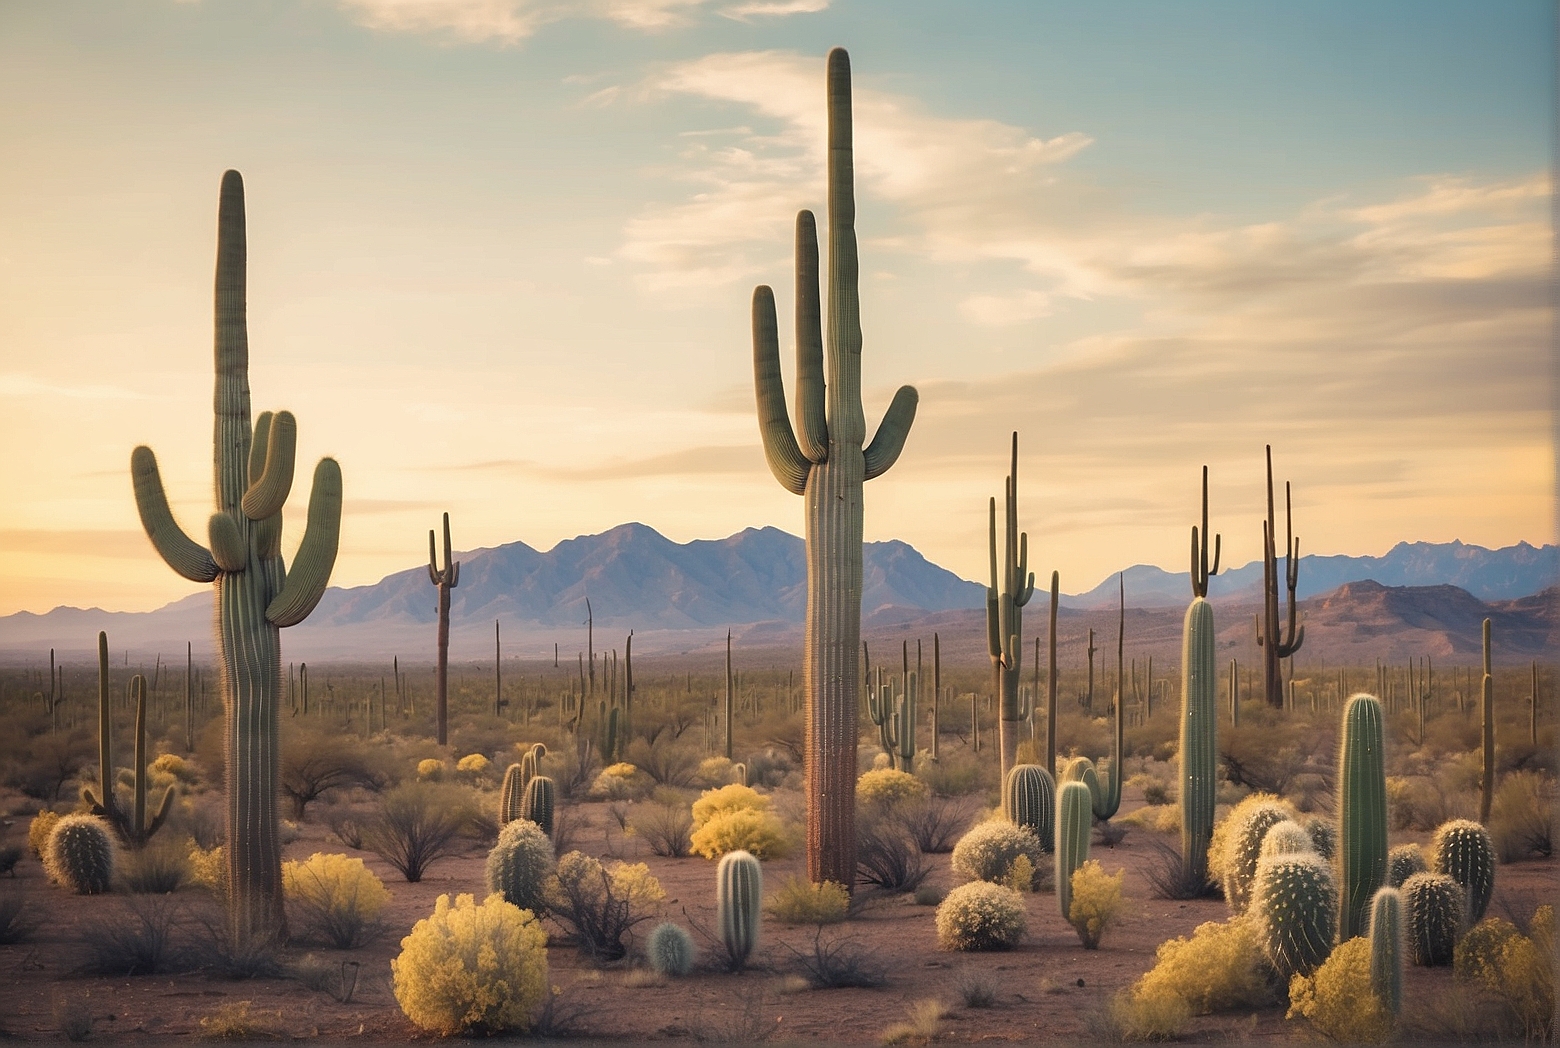 Step-by-Step Guide: Planting and Caring for Saguaro Cactus